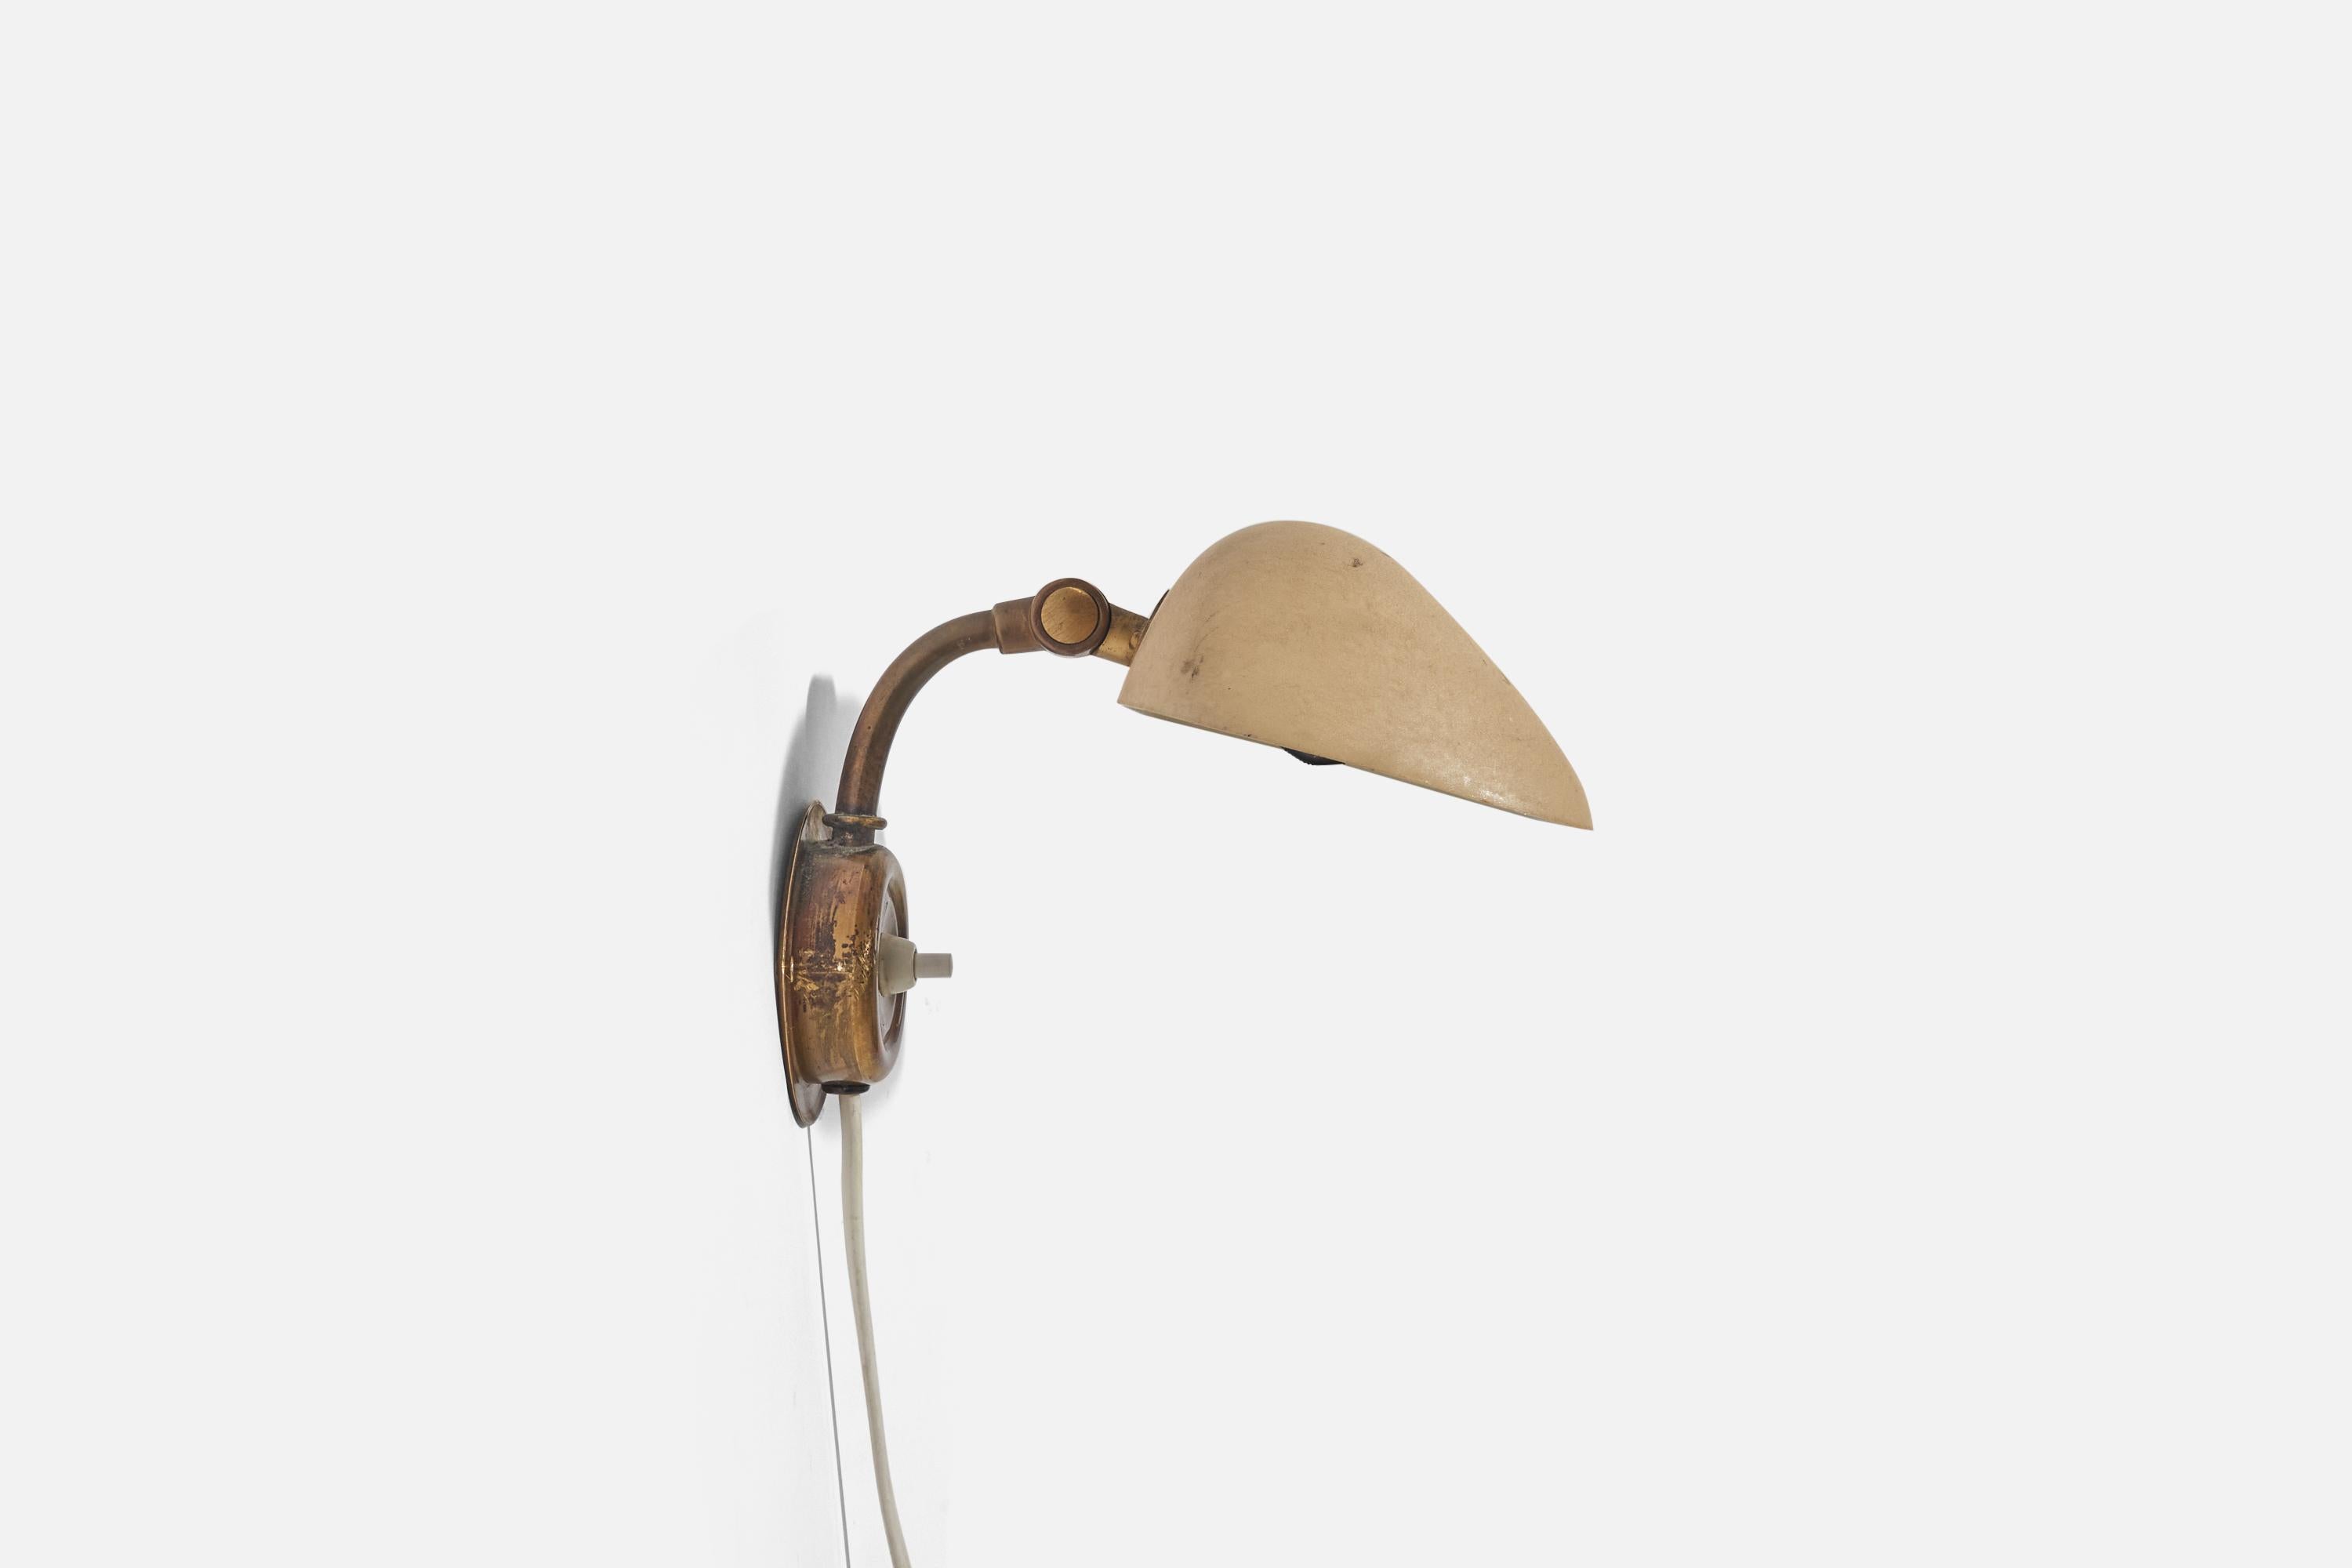 A metal and brass wall light designed and produced by Nordiska Kompaniet, 1940s.

Dimensions variable, measured as illustrated in first image.

Socket takes E-14 bulb.

There is no maximum wattage stated on the fixture.

Dimensions of Back